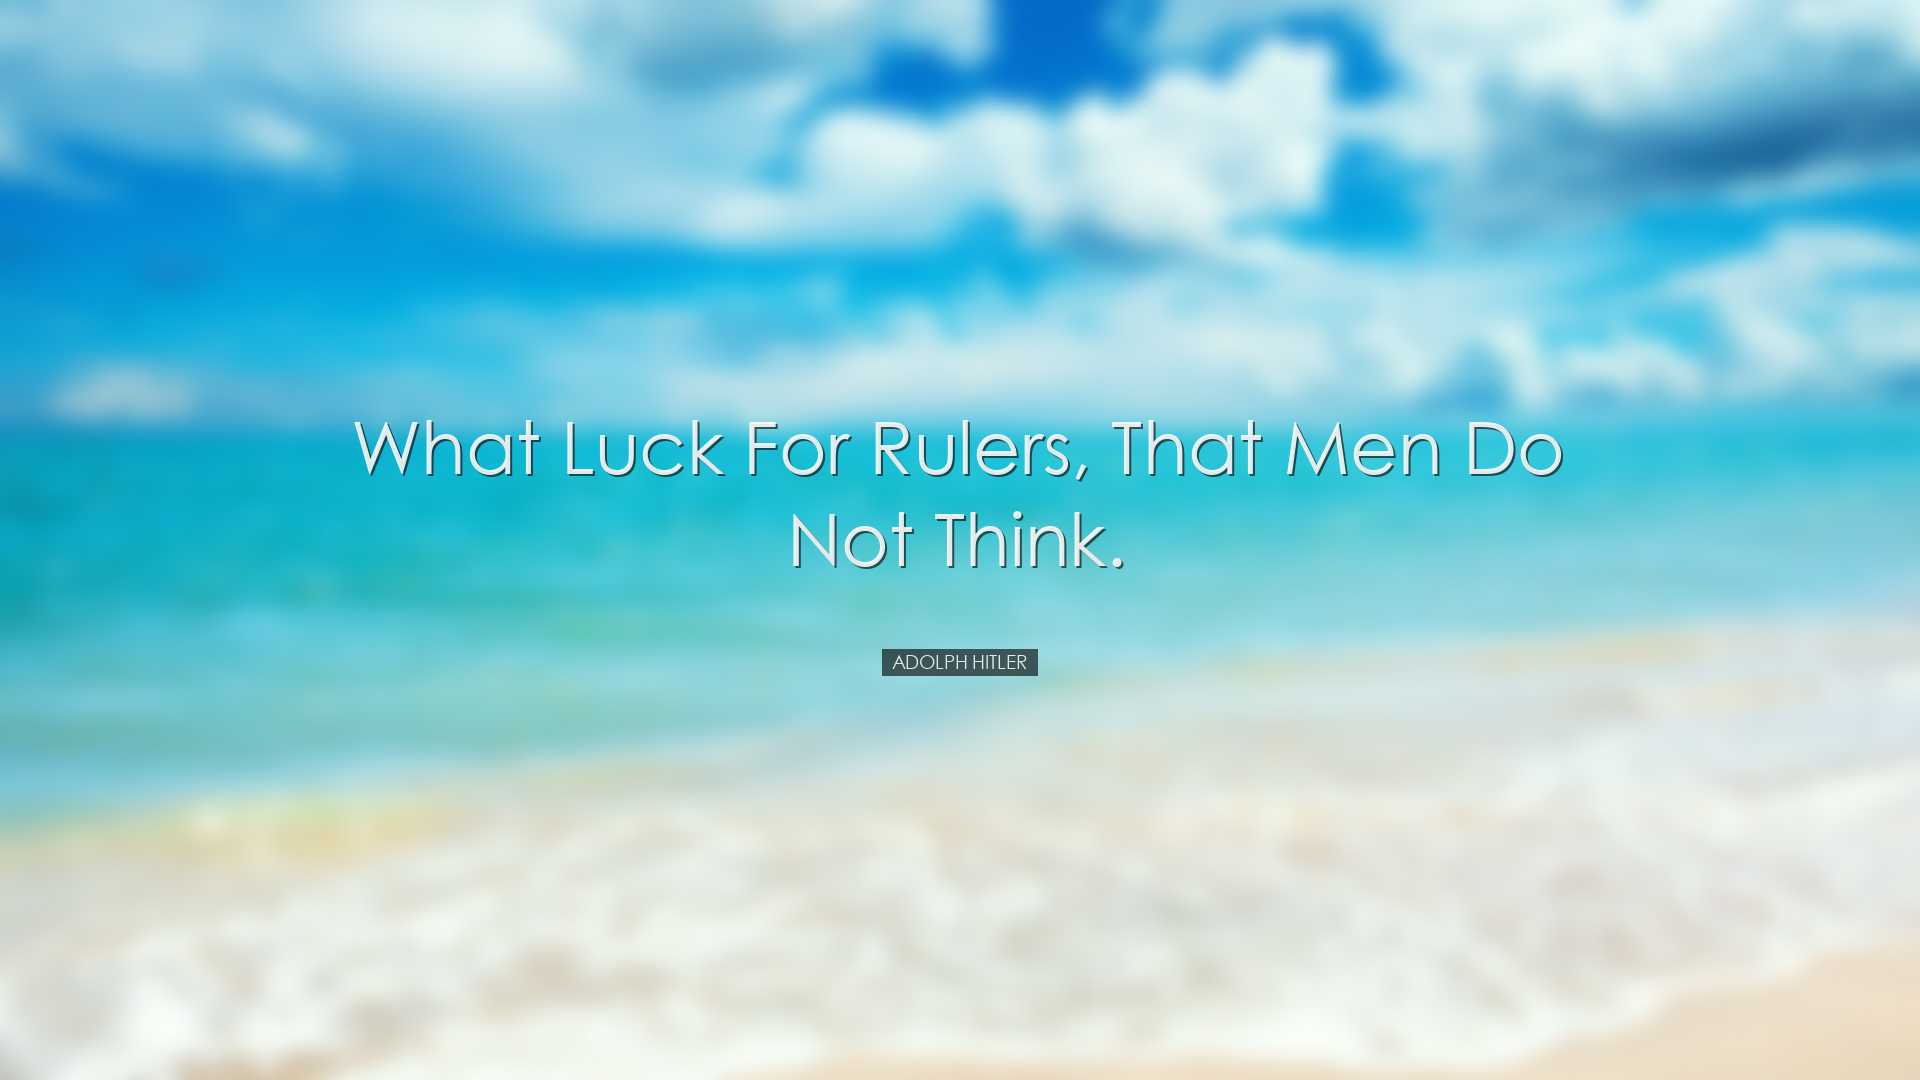 What luck for rulers, that men do not think. - Adolph Hitler